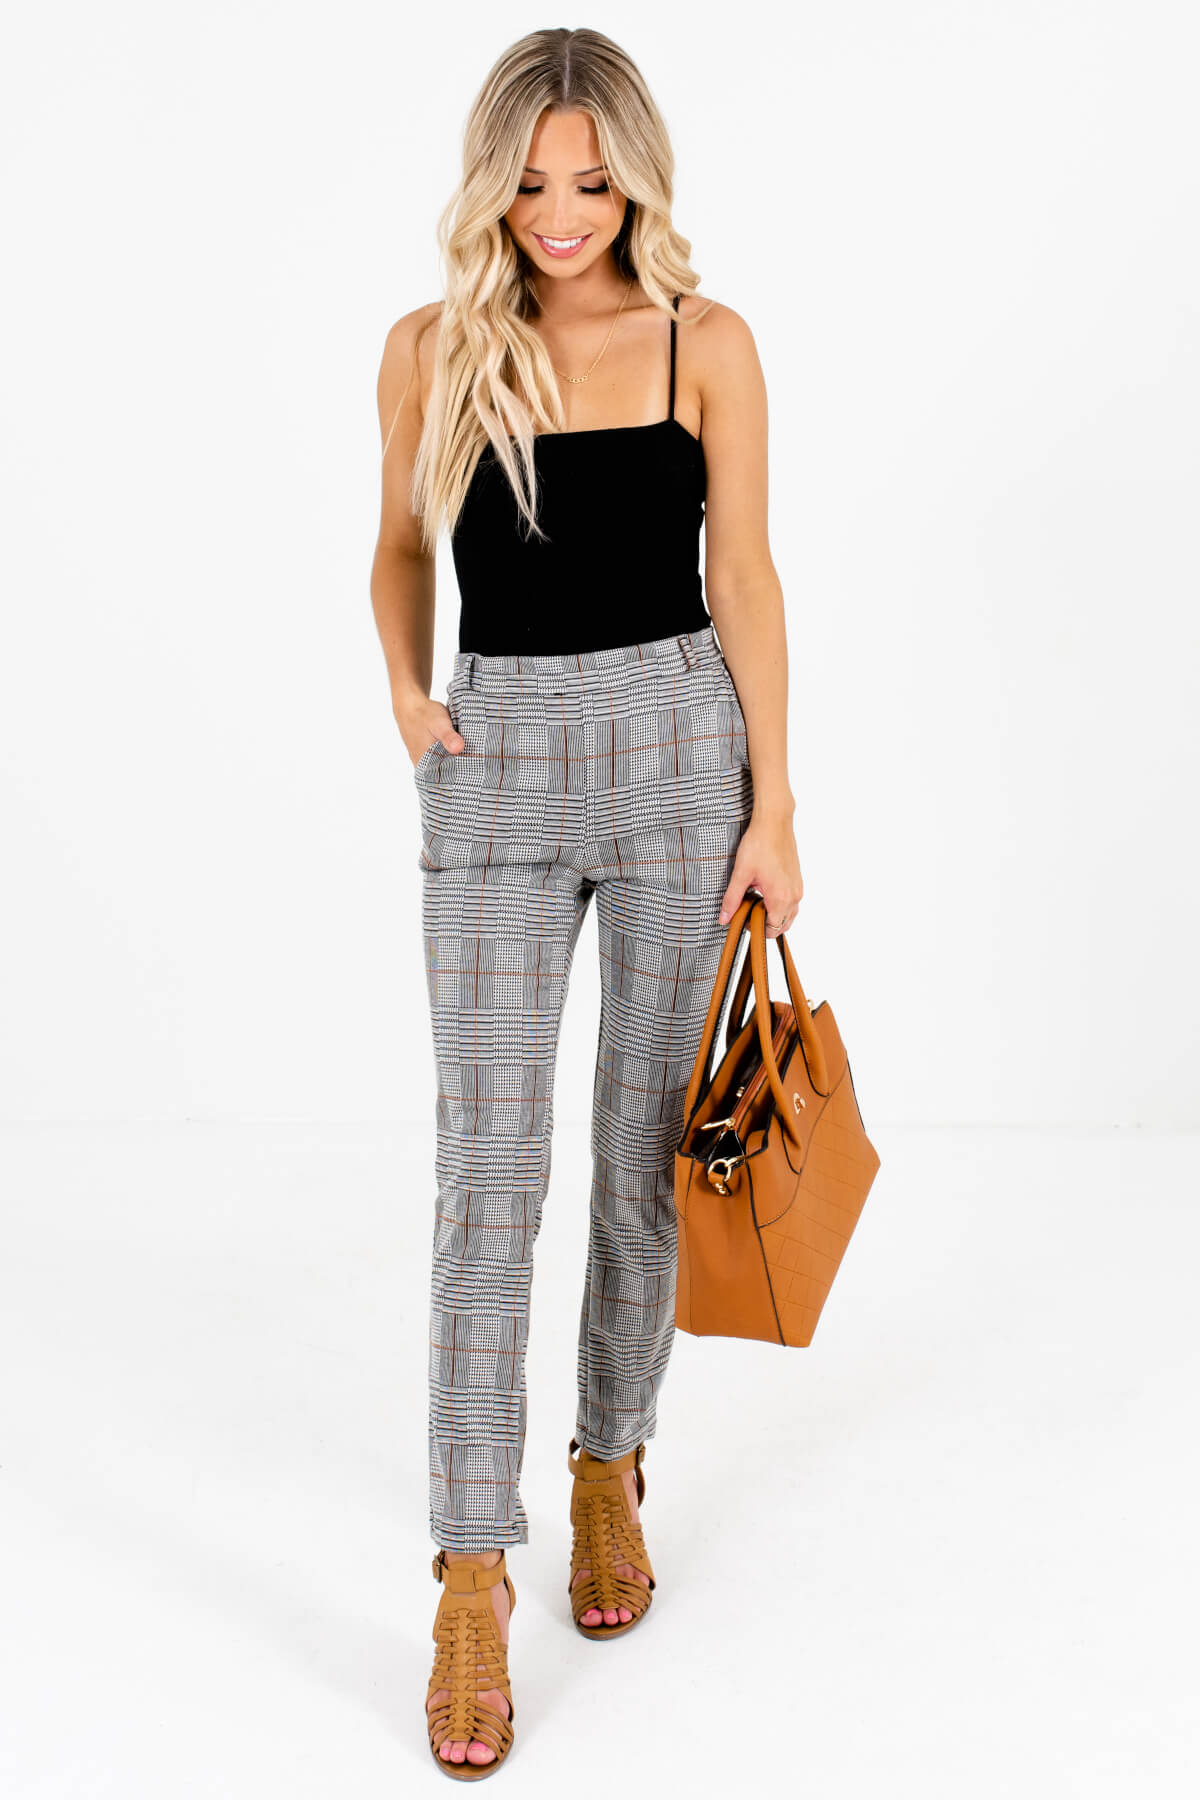 Women's Gray Plaid High-Quality Stretchy Material Boutique Pants